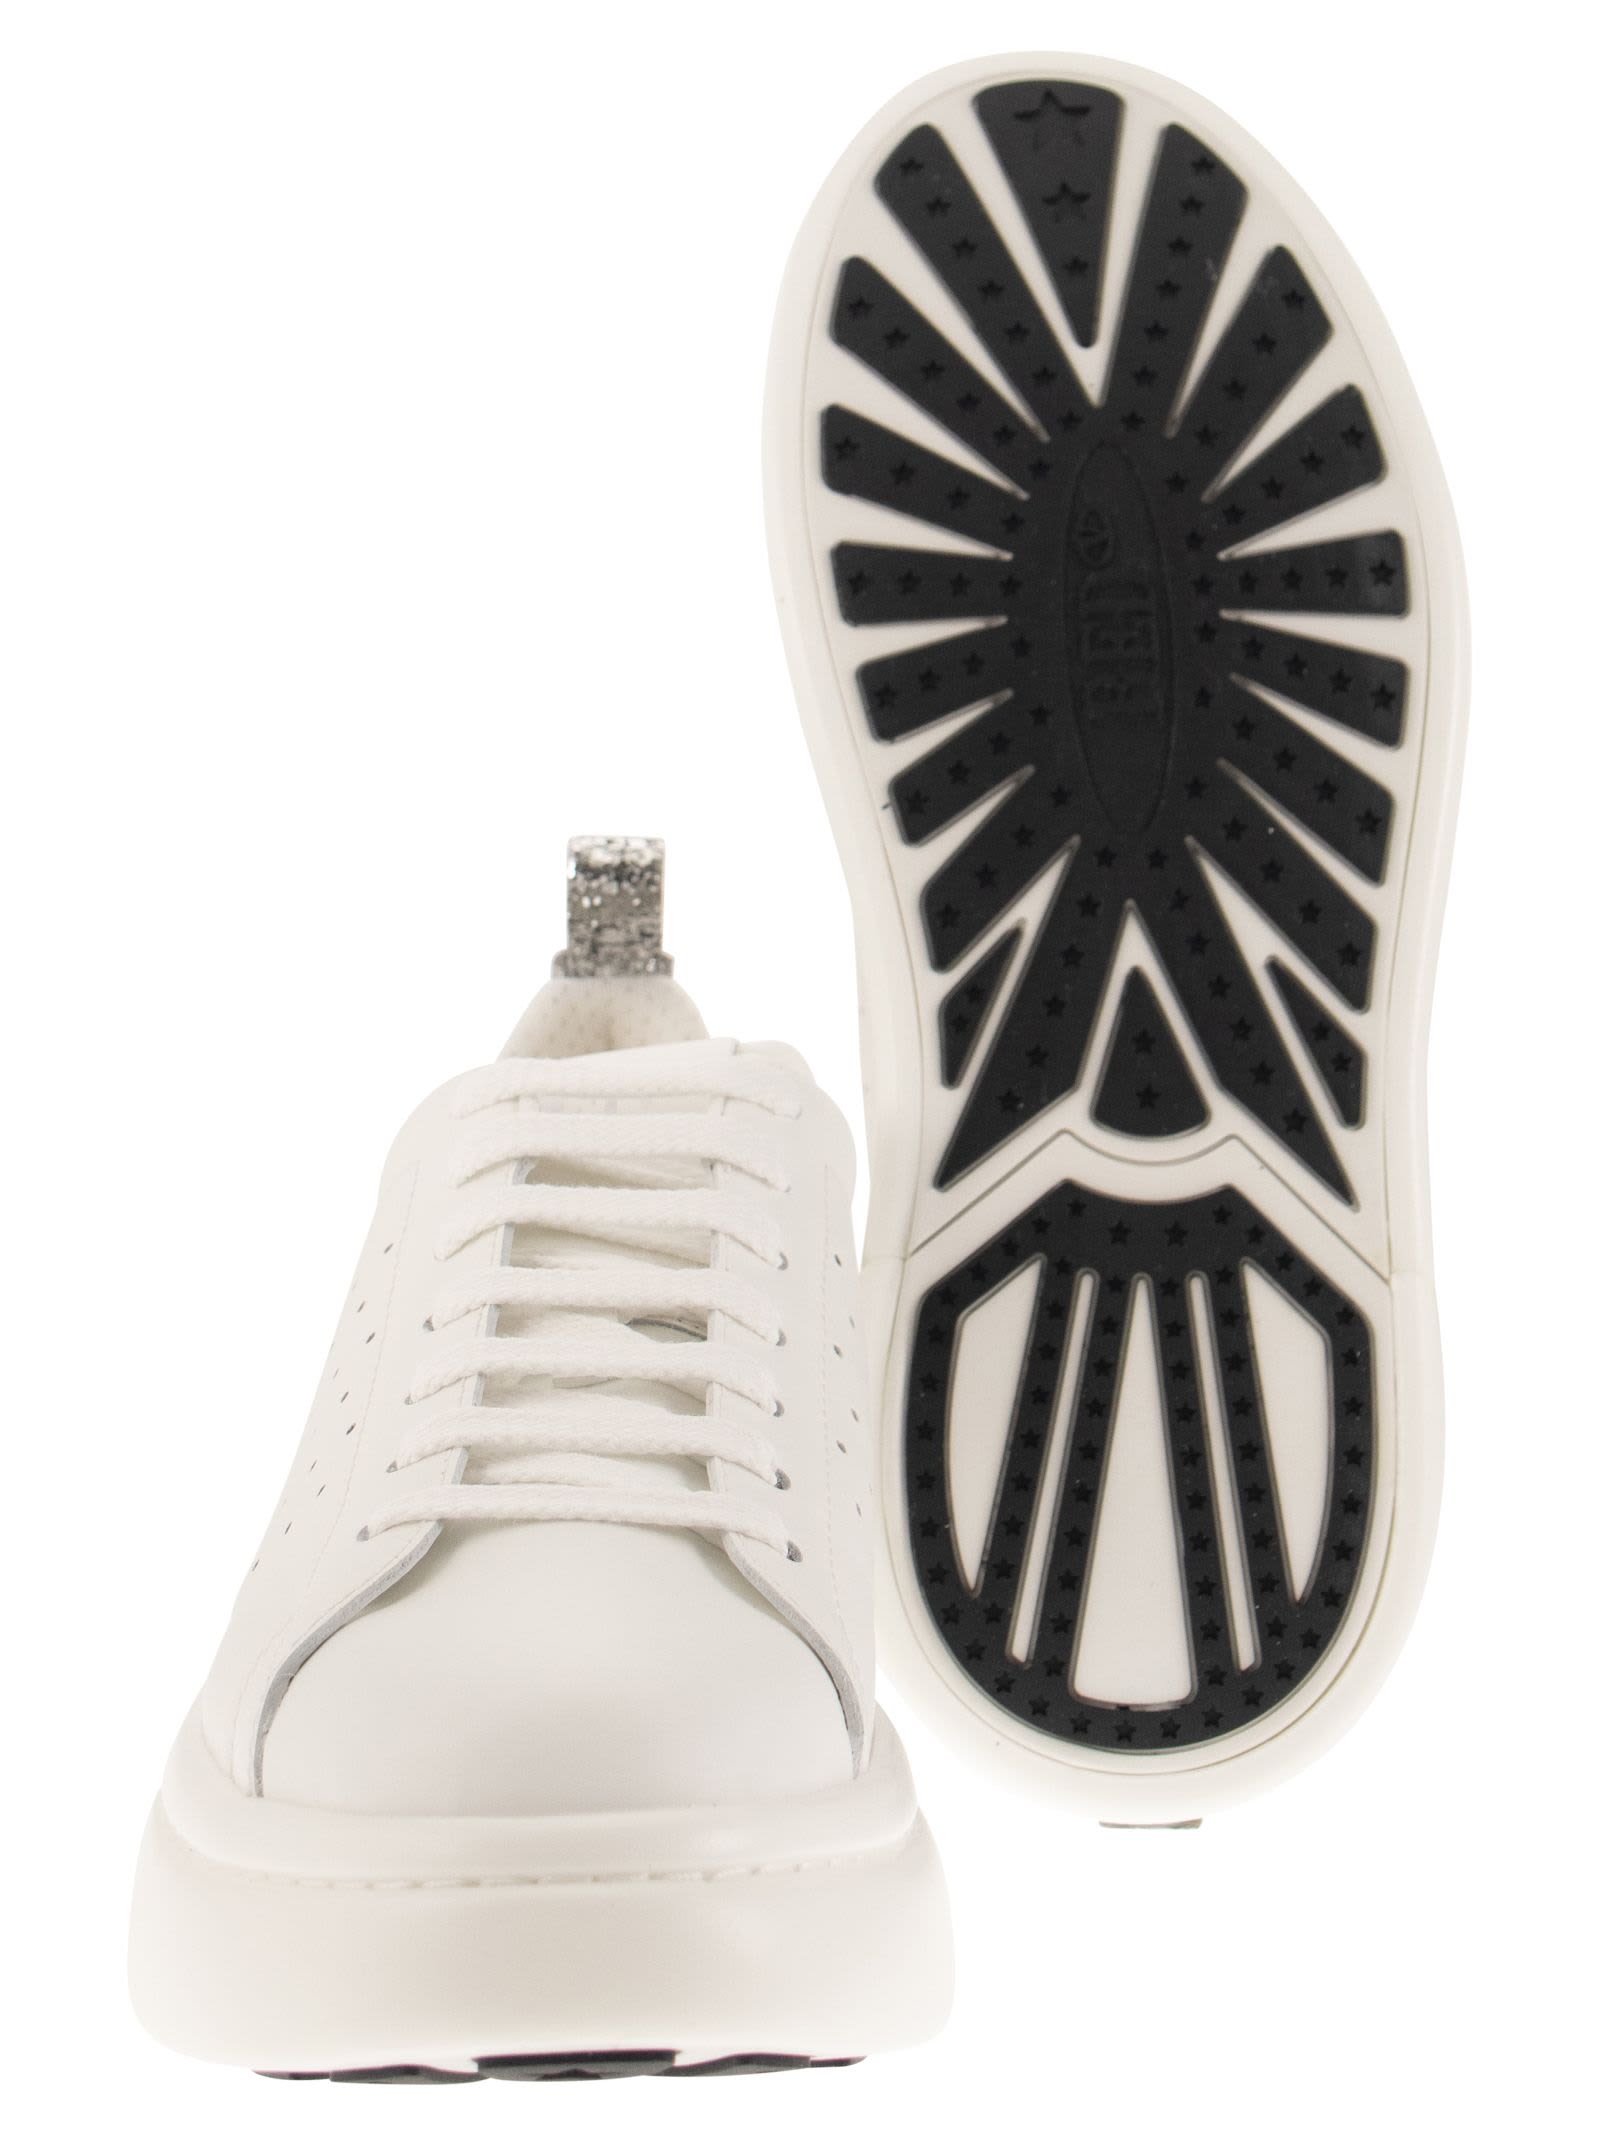 Shop Red Valentino Sneakers Bowalk In White/silver